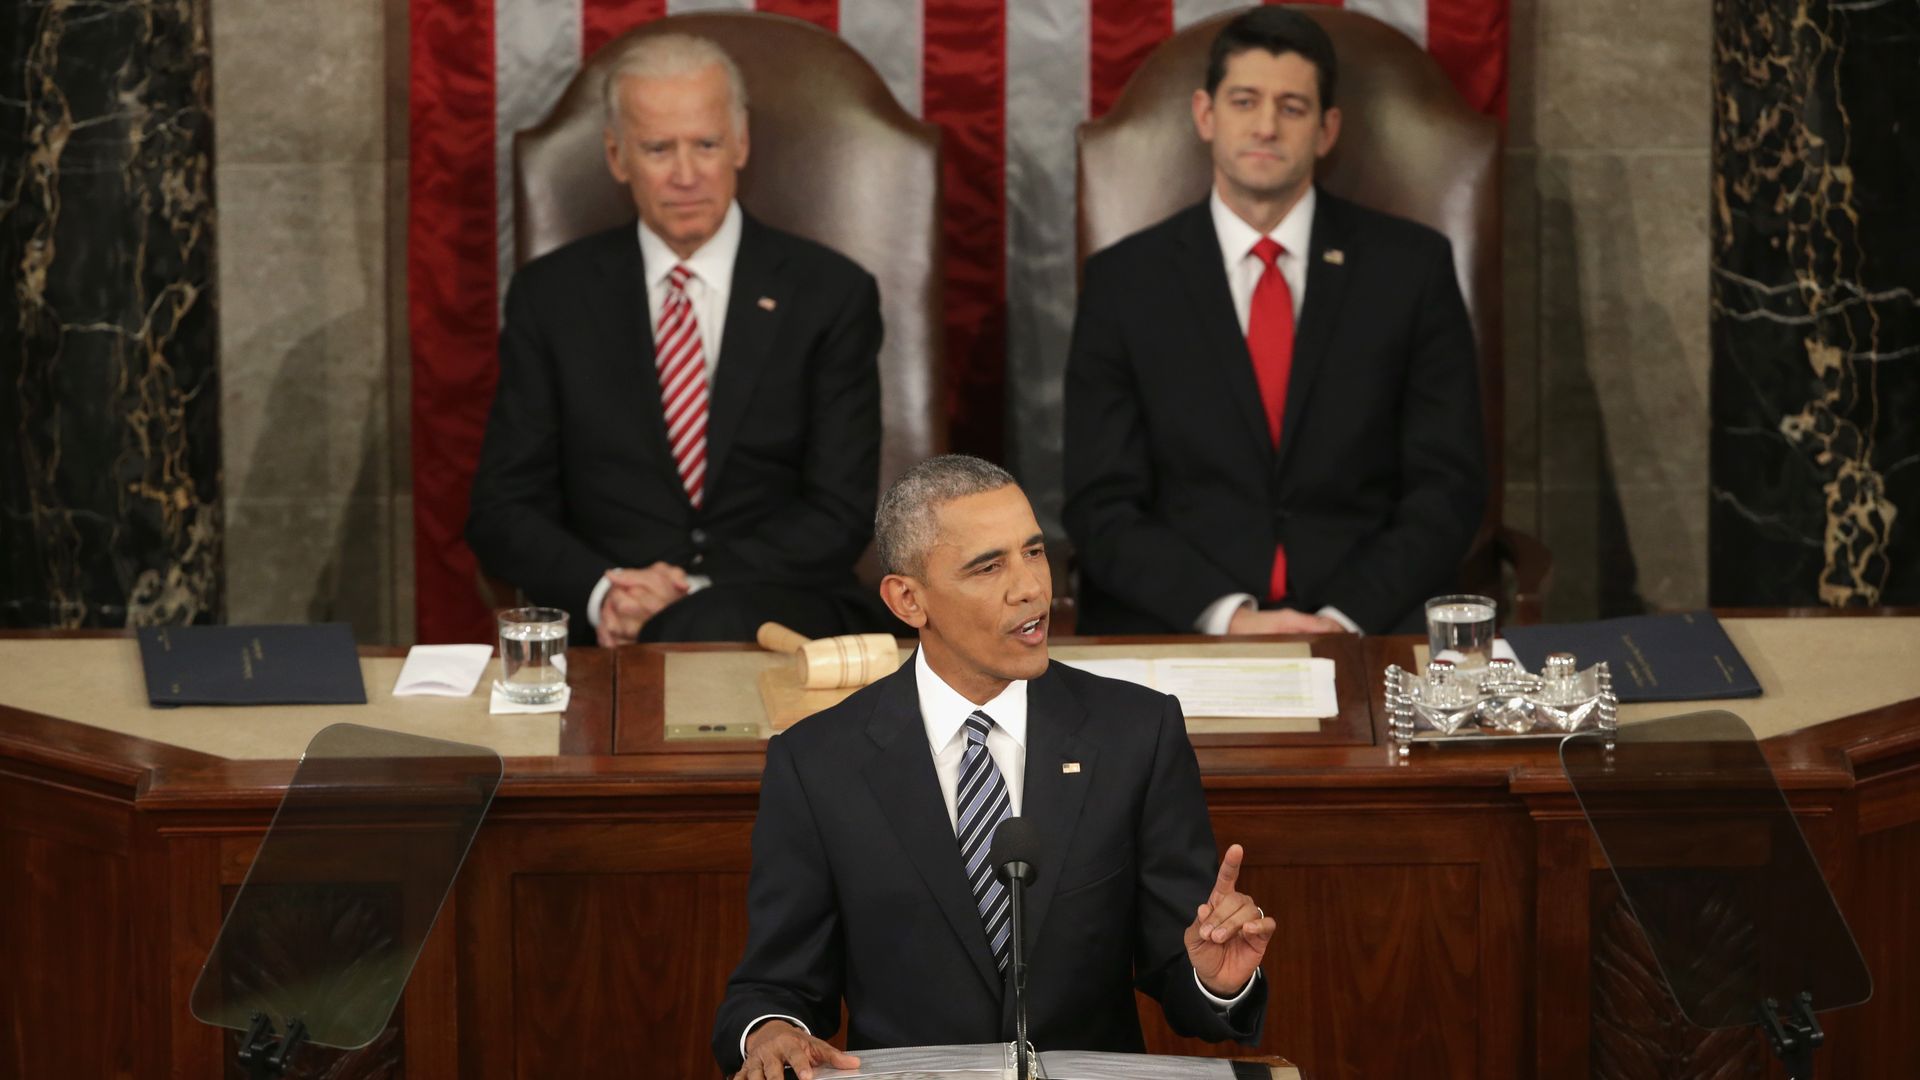 Vice President Joe Biden and House Speaker Paul Ryan are seen sitting behind President Obama as he delivers his final State of the Union address in  January 2016.